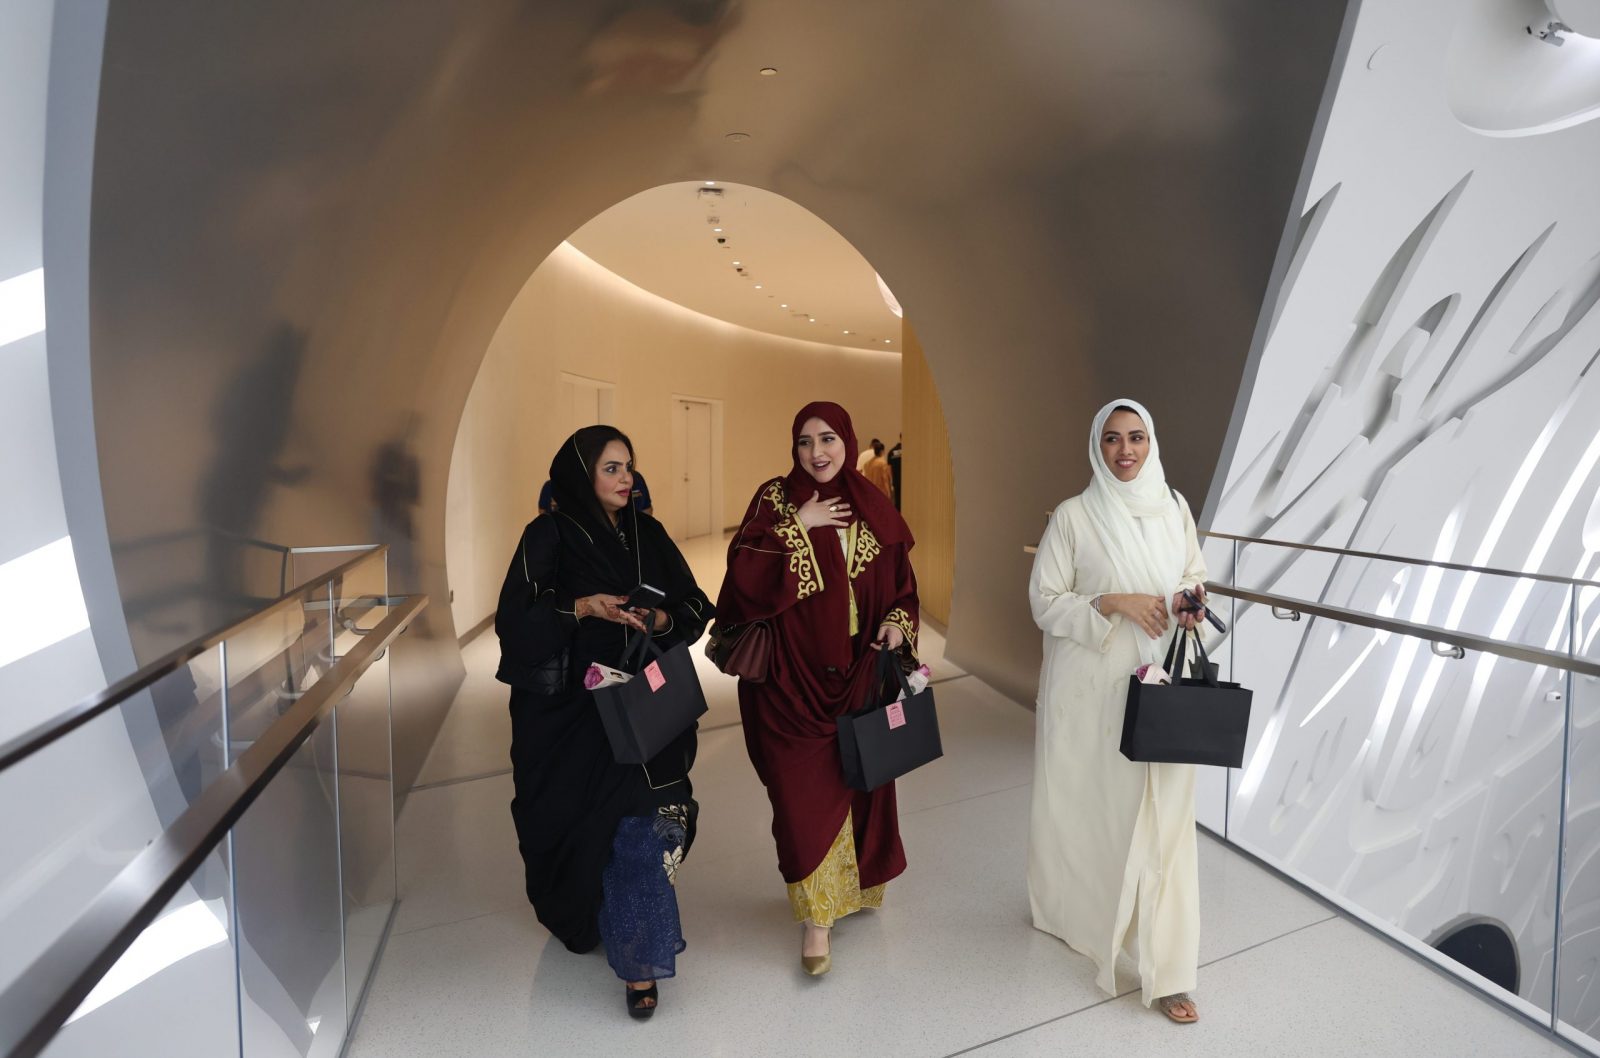 epa10824560 Emirati women arrive at the Abaya Rally event at the Museum of The Future in the Gulf Emirate of Dubai, United Arab Emirates, 27 August 2023. The Abaya Rally is held on the occasion of Emirati Women's Day, which is marked annually in the UAE on 28 August. Fatima bint Mubarak Al Ketbi, wife of the former president of the UAE Sheikh Zayed bin Sultan Al Nahyan, founded Emirati Women's Day in 2015 to award female's efforts and to celebrate their achievements.  EPA/ALI HAIDER